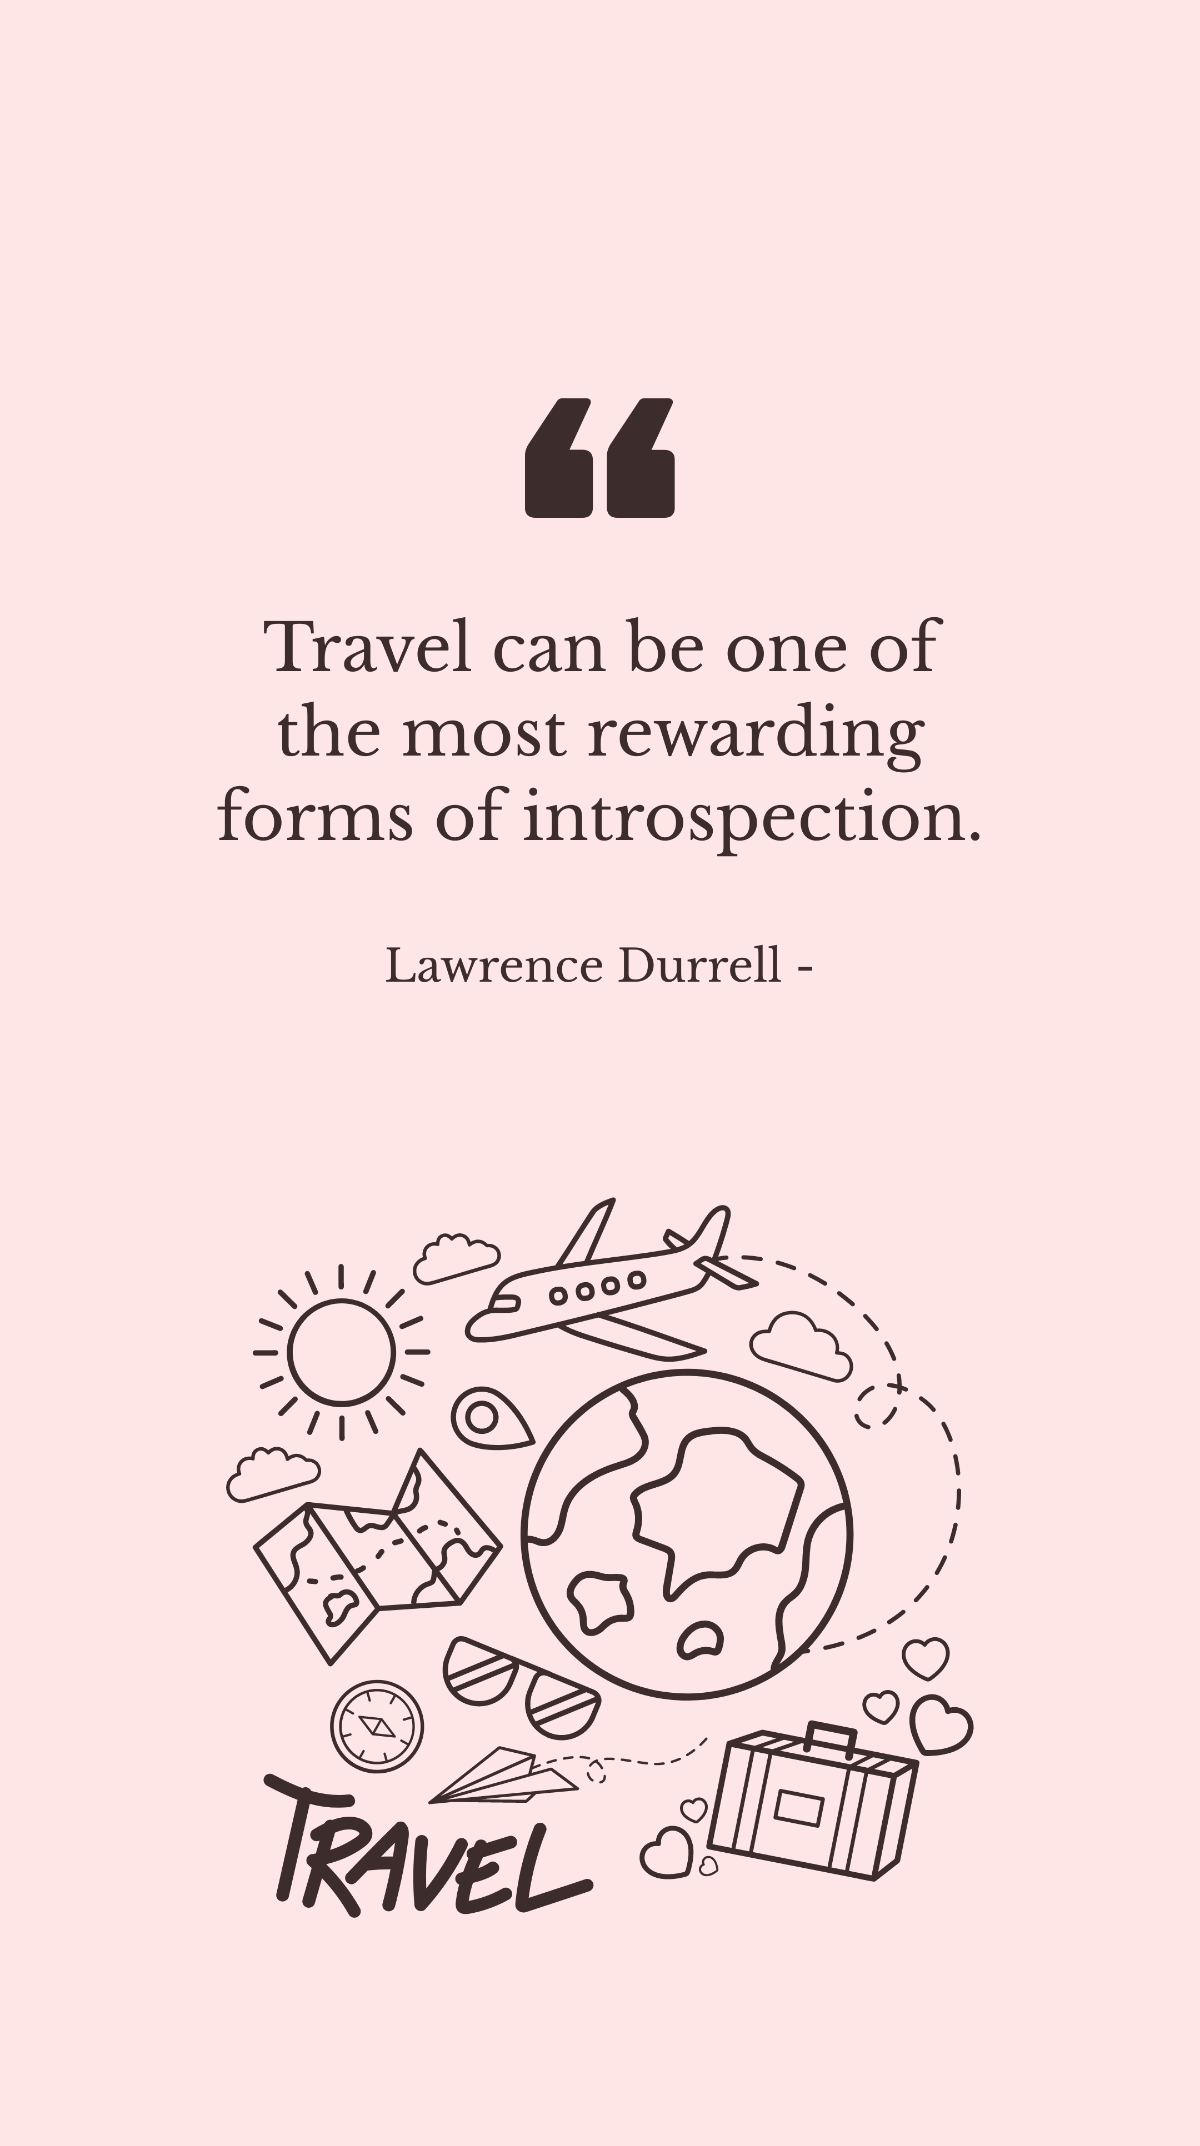 Lawrence Durrell - Travel can be one of the most rewarding forms of introspection.